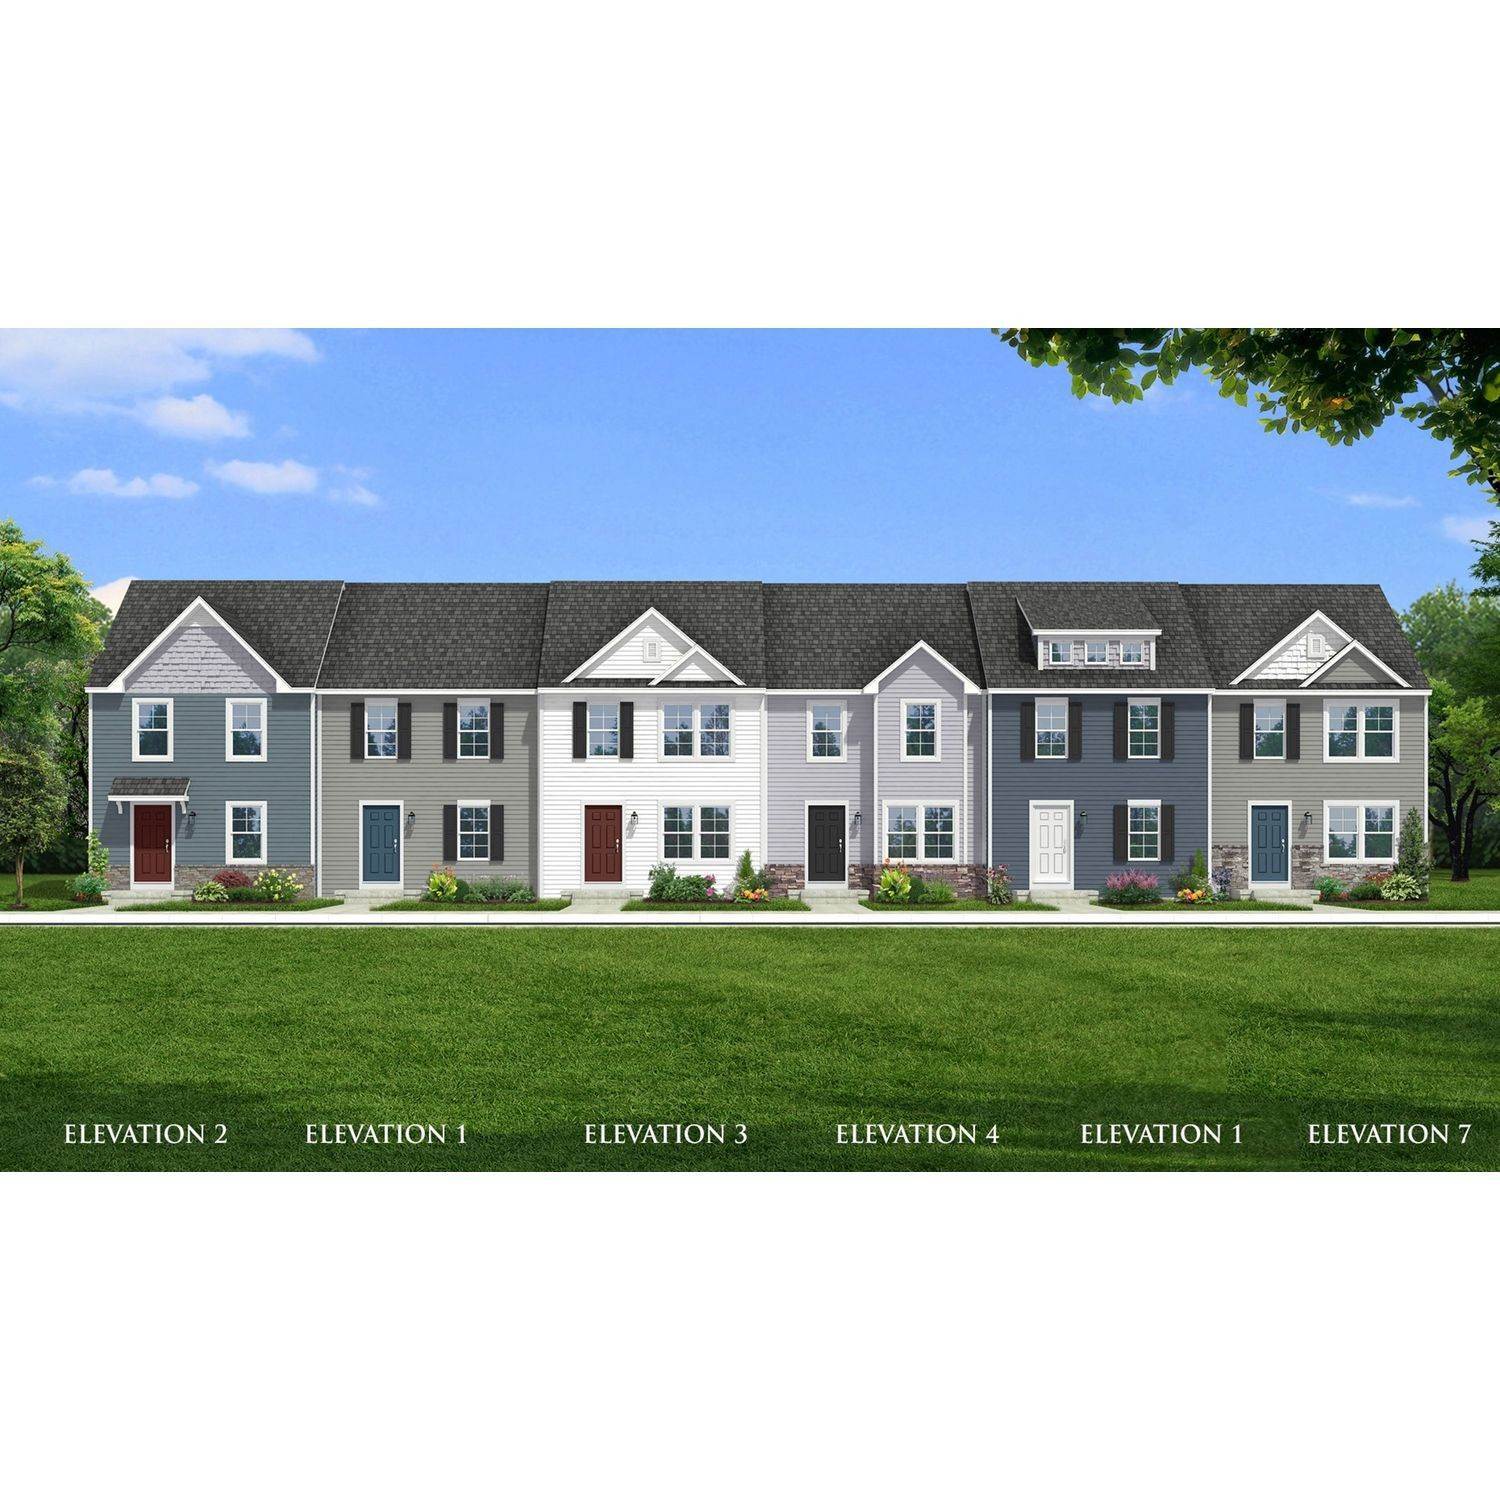 15. Whispering Pines Townhomes building at 16 Loblolly Drive, Bunker Hill, WV 25413